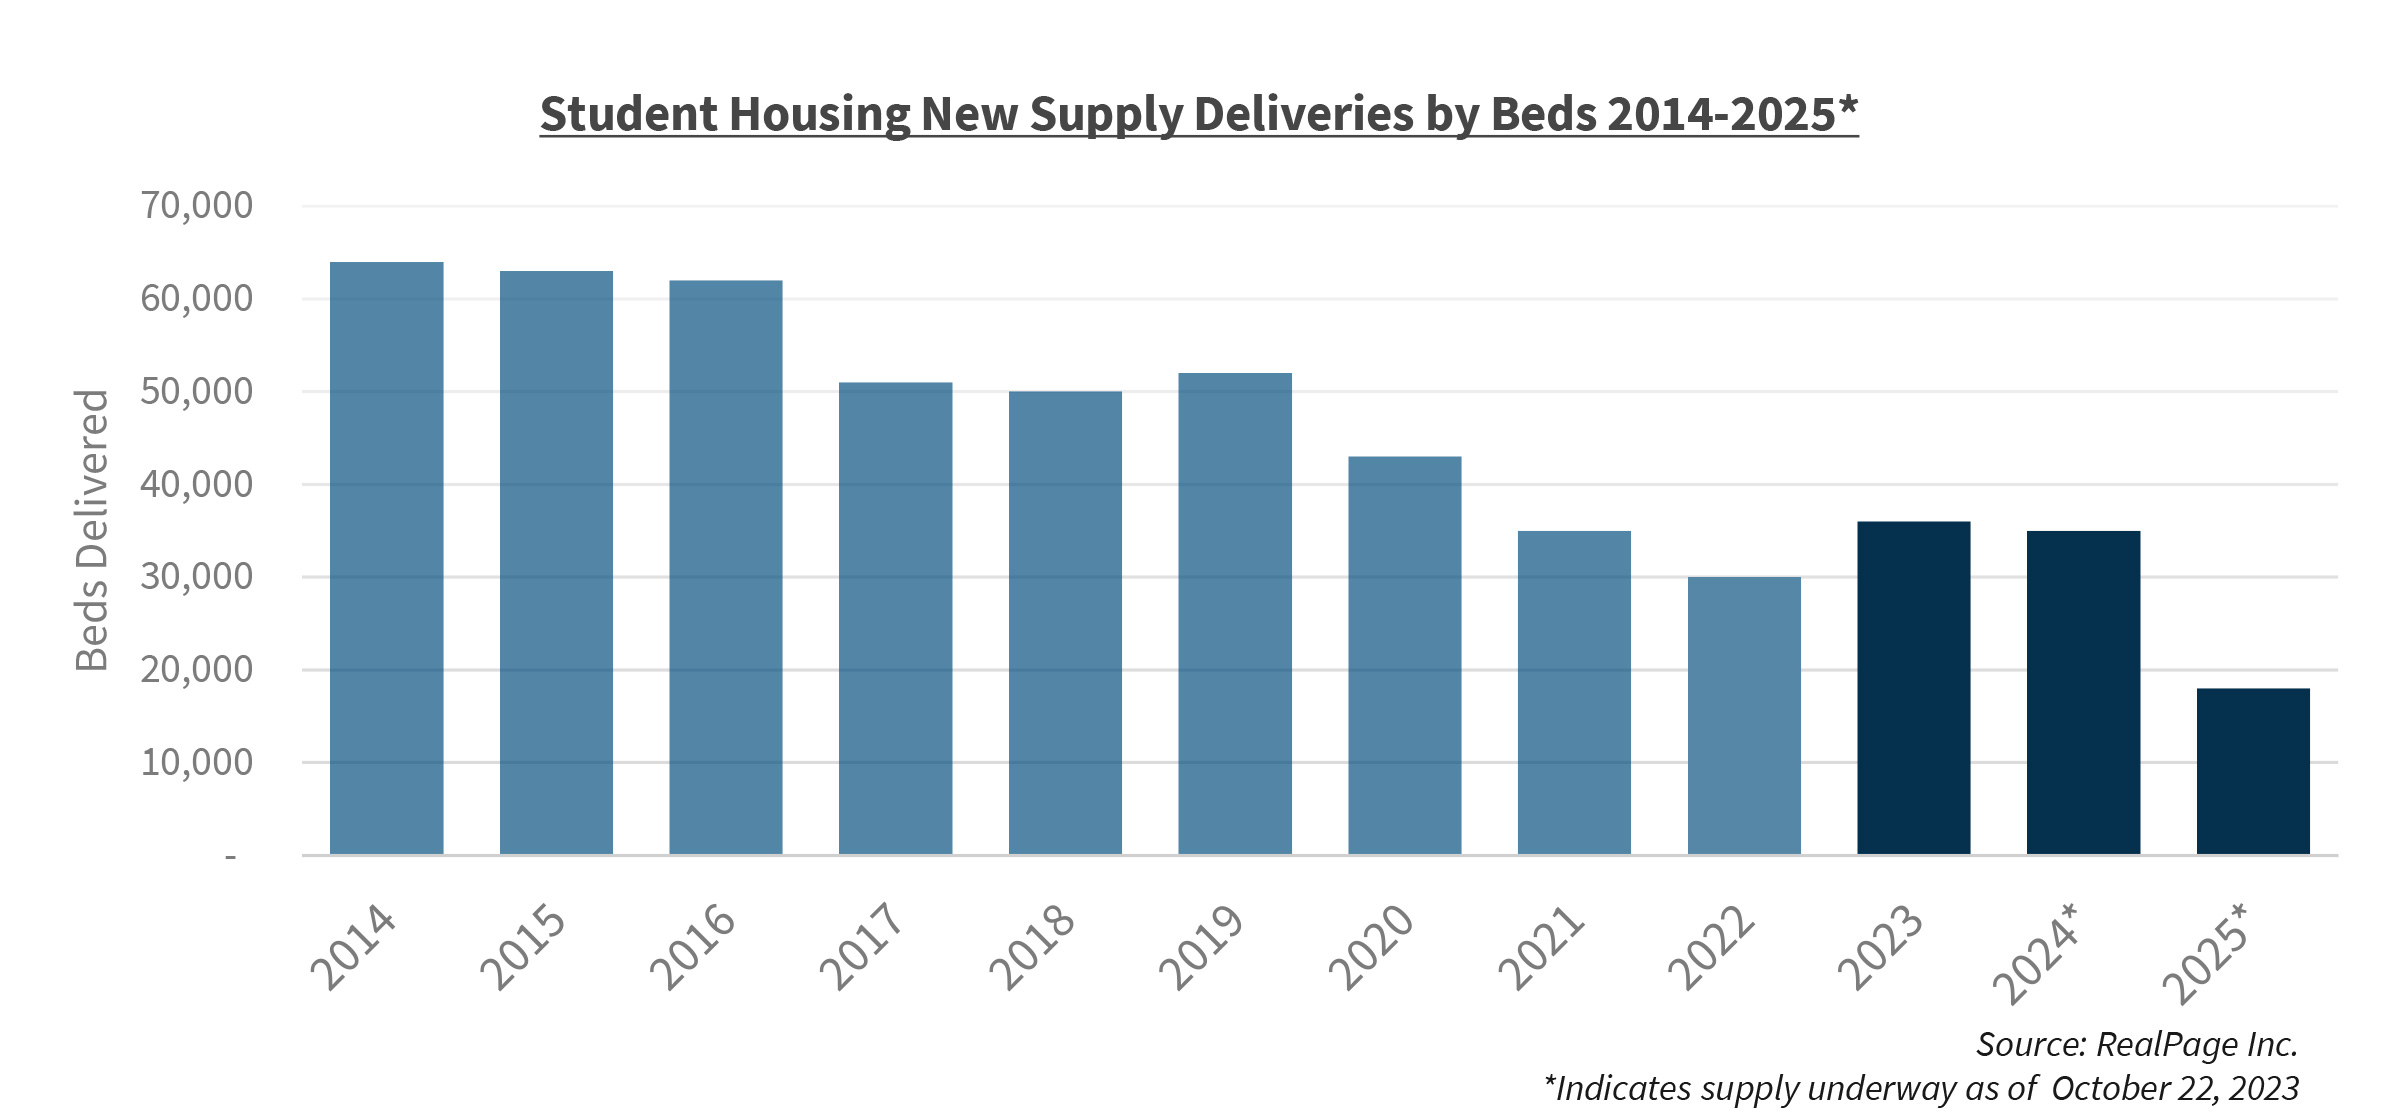 Student Housing New Supply Deliveries by Beds 2014-2025